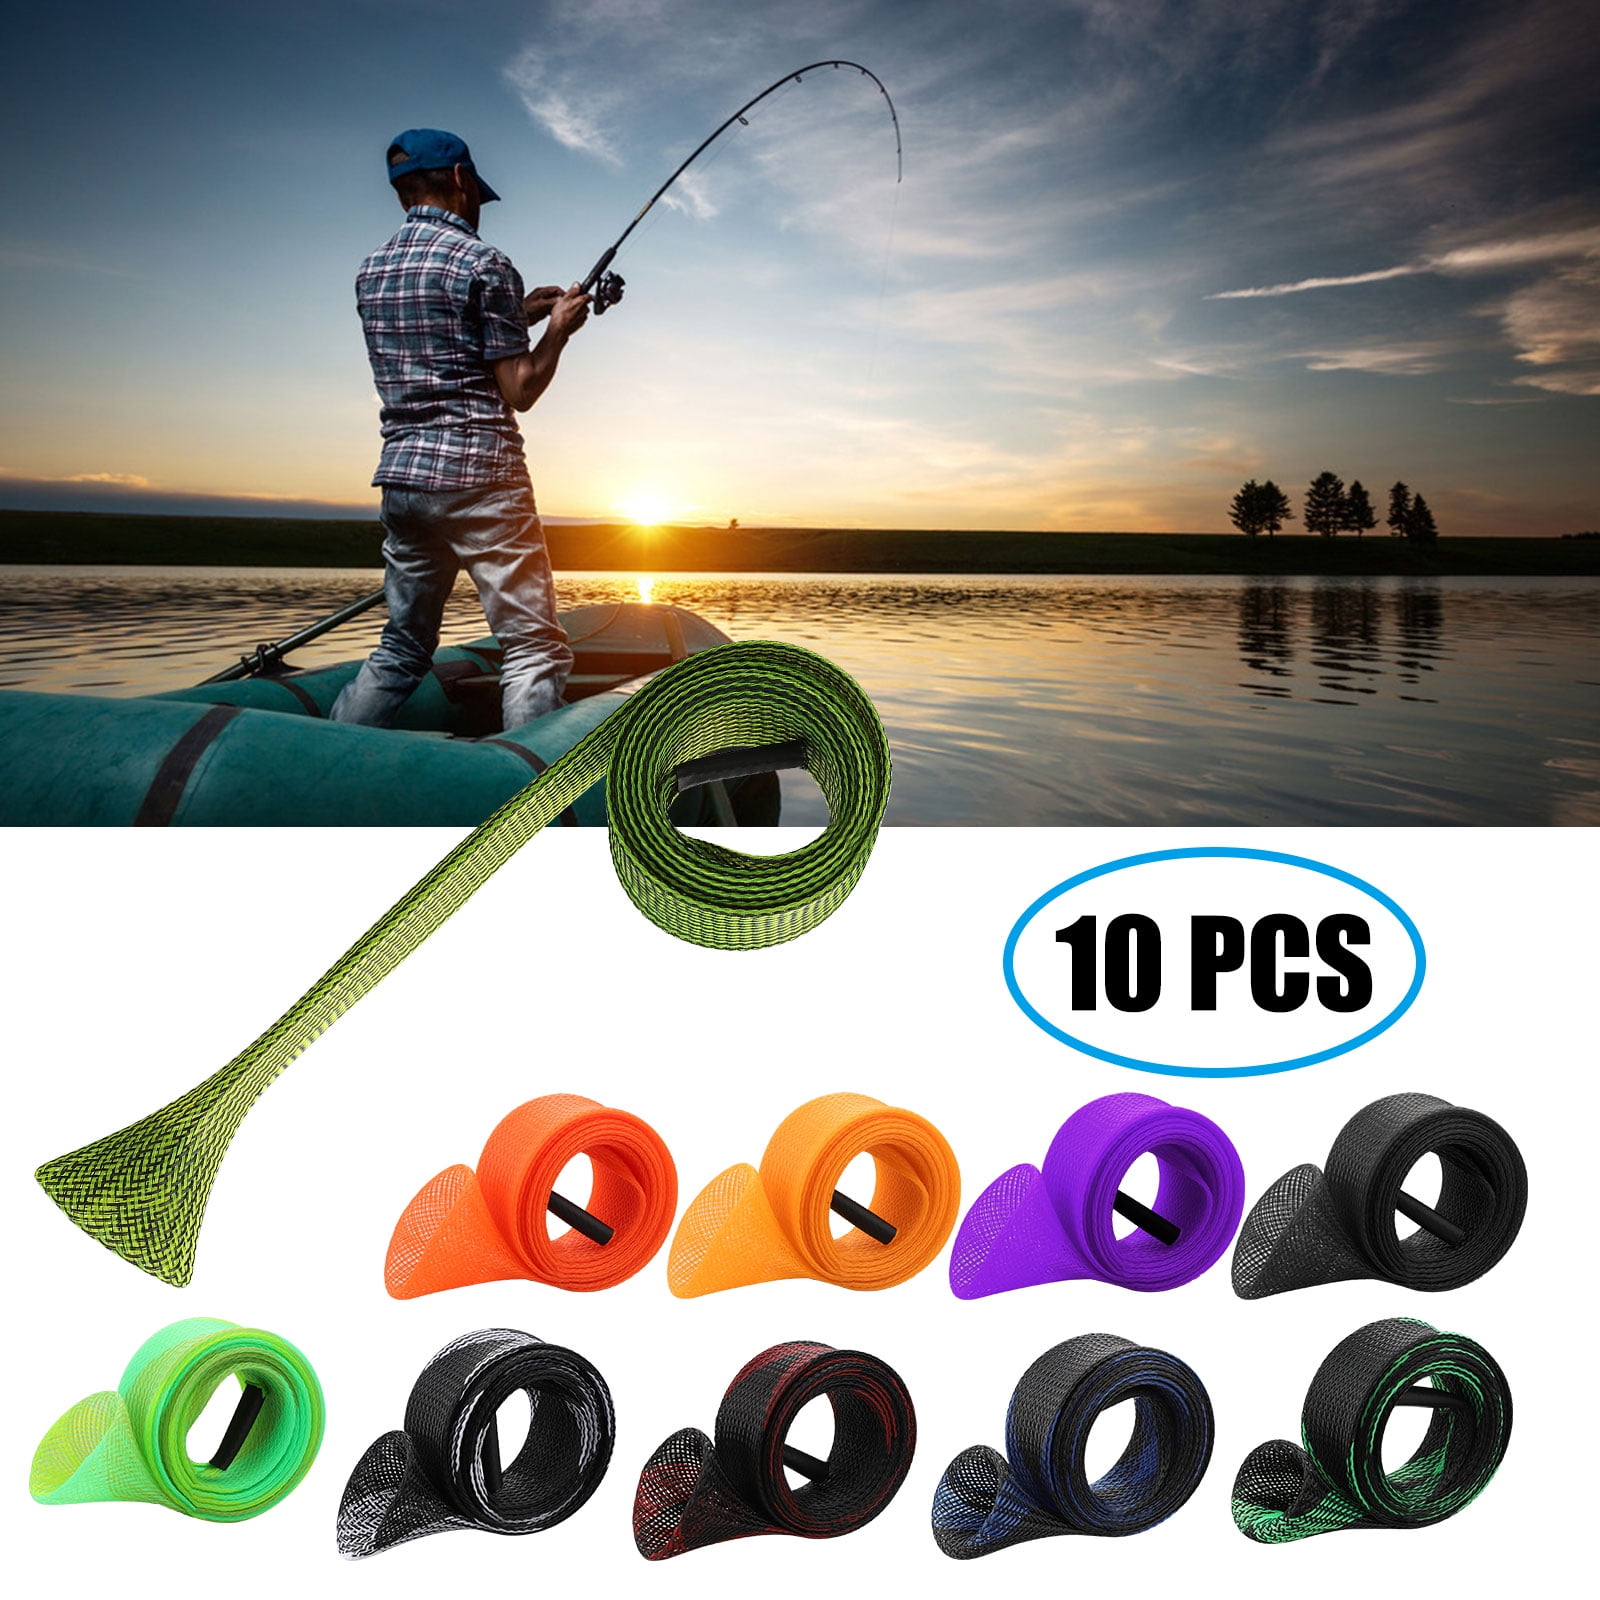 5pcs Fishing Rod Cover Braided Mesh Casting Spinning Fishing Pole Sleeve Glove 